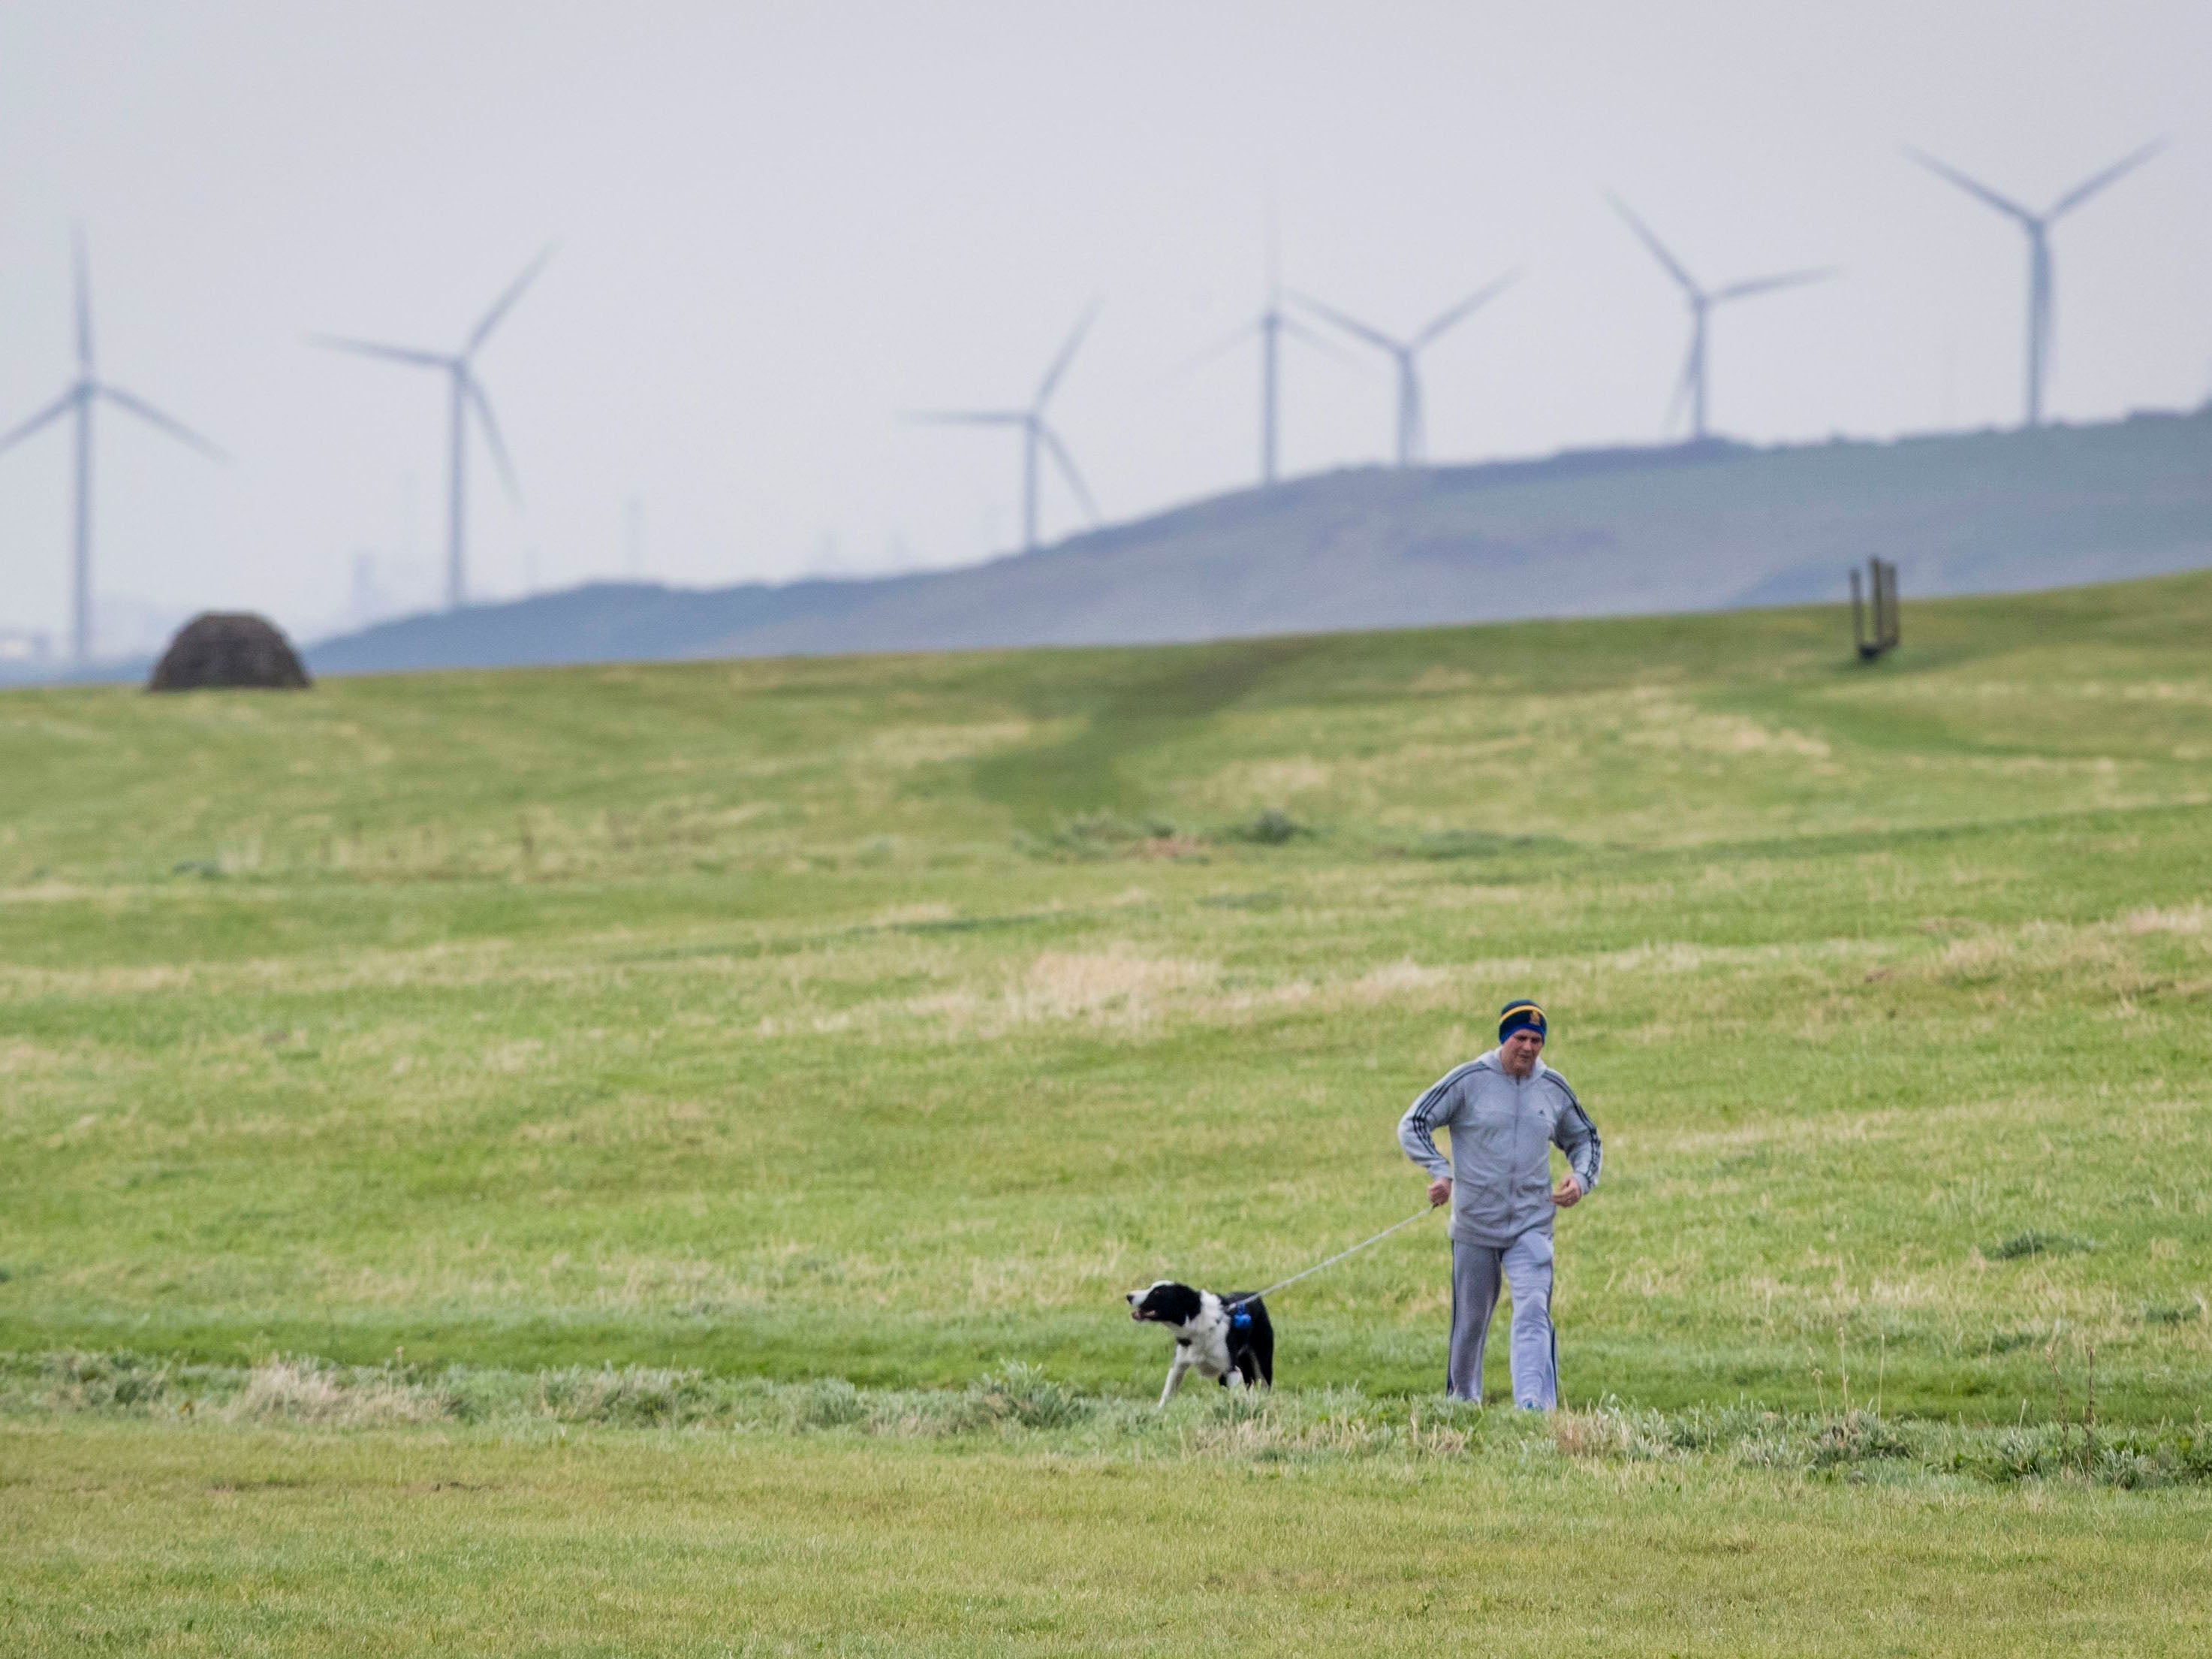 Wind turbines in Cumbria, where a new mine is unlikely be given the go-ahead